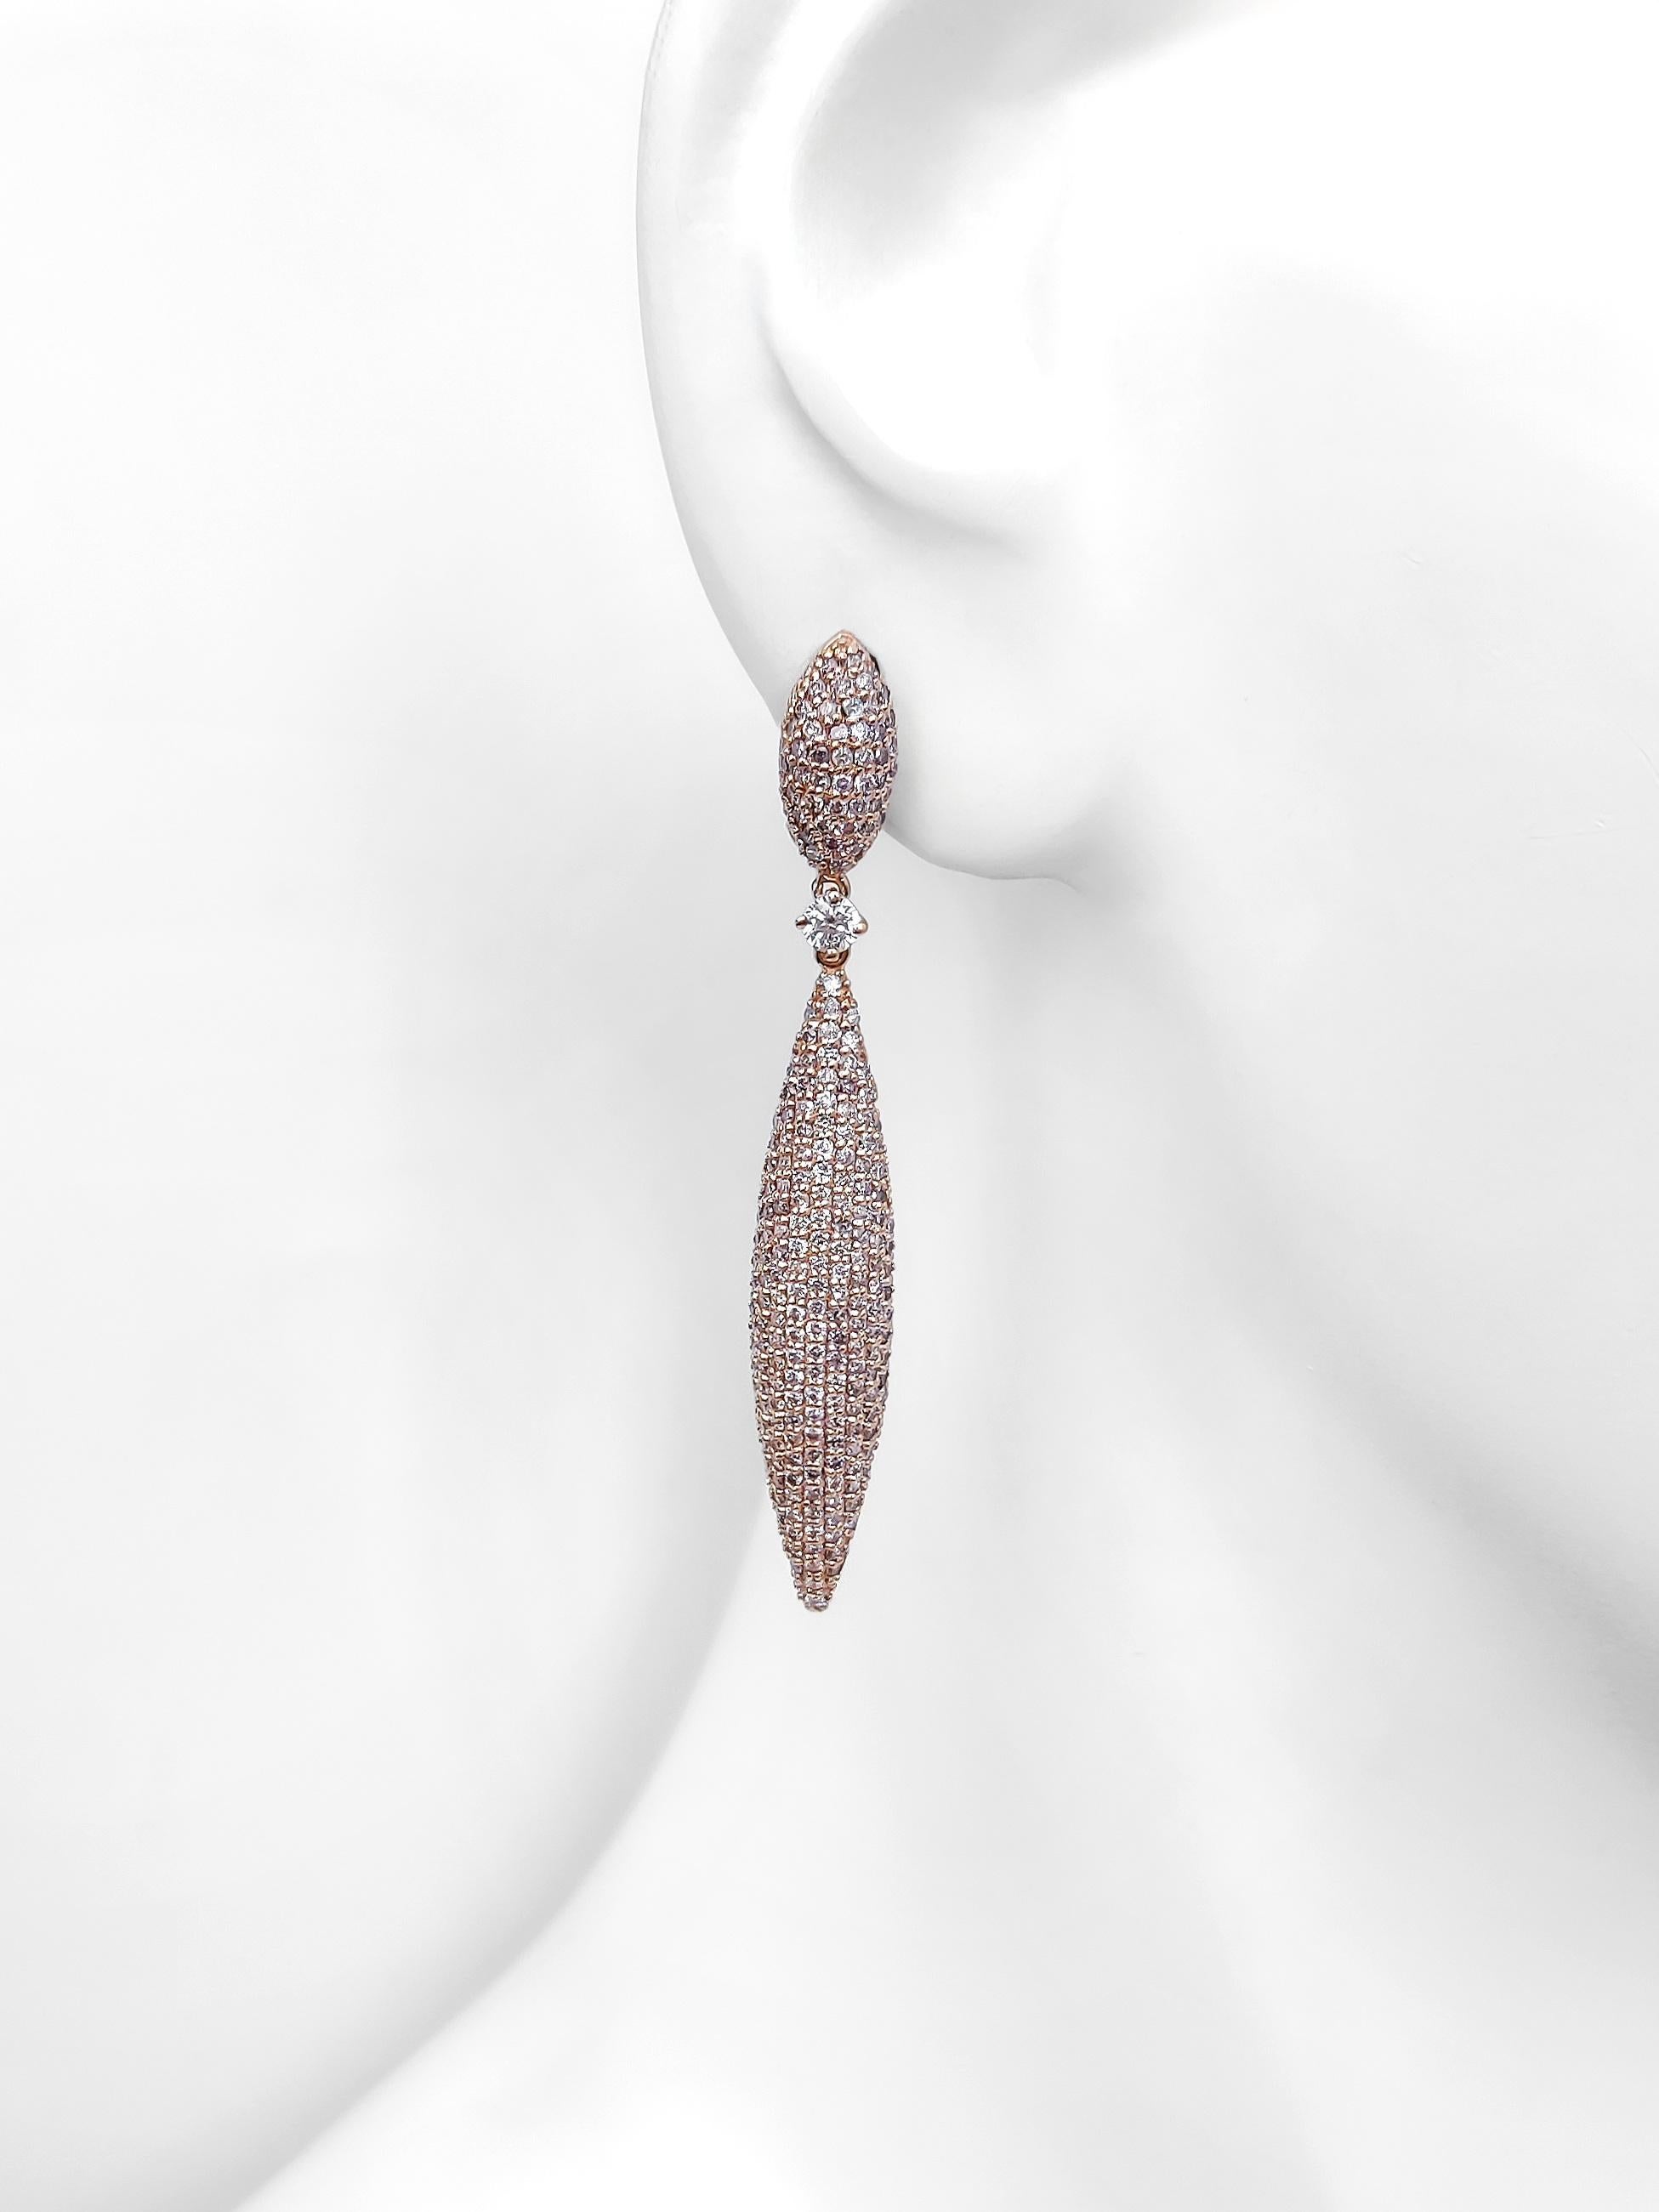 FOR THE USA CUSTOMERS NO VAT

With 454 natural diamonds, weighing 3.02 carats in total, delicately arranged in a stunning cascade, these drop earrings are a true masterpiece. The captivating shades of faint pink to fancy purplish pink, coupled with